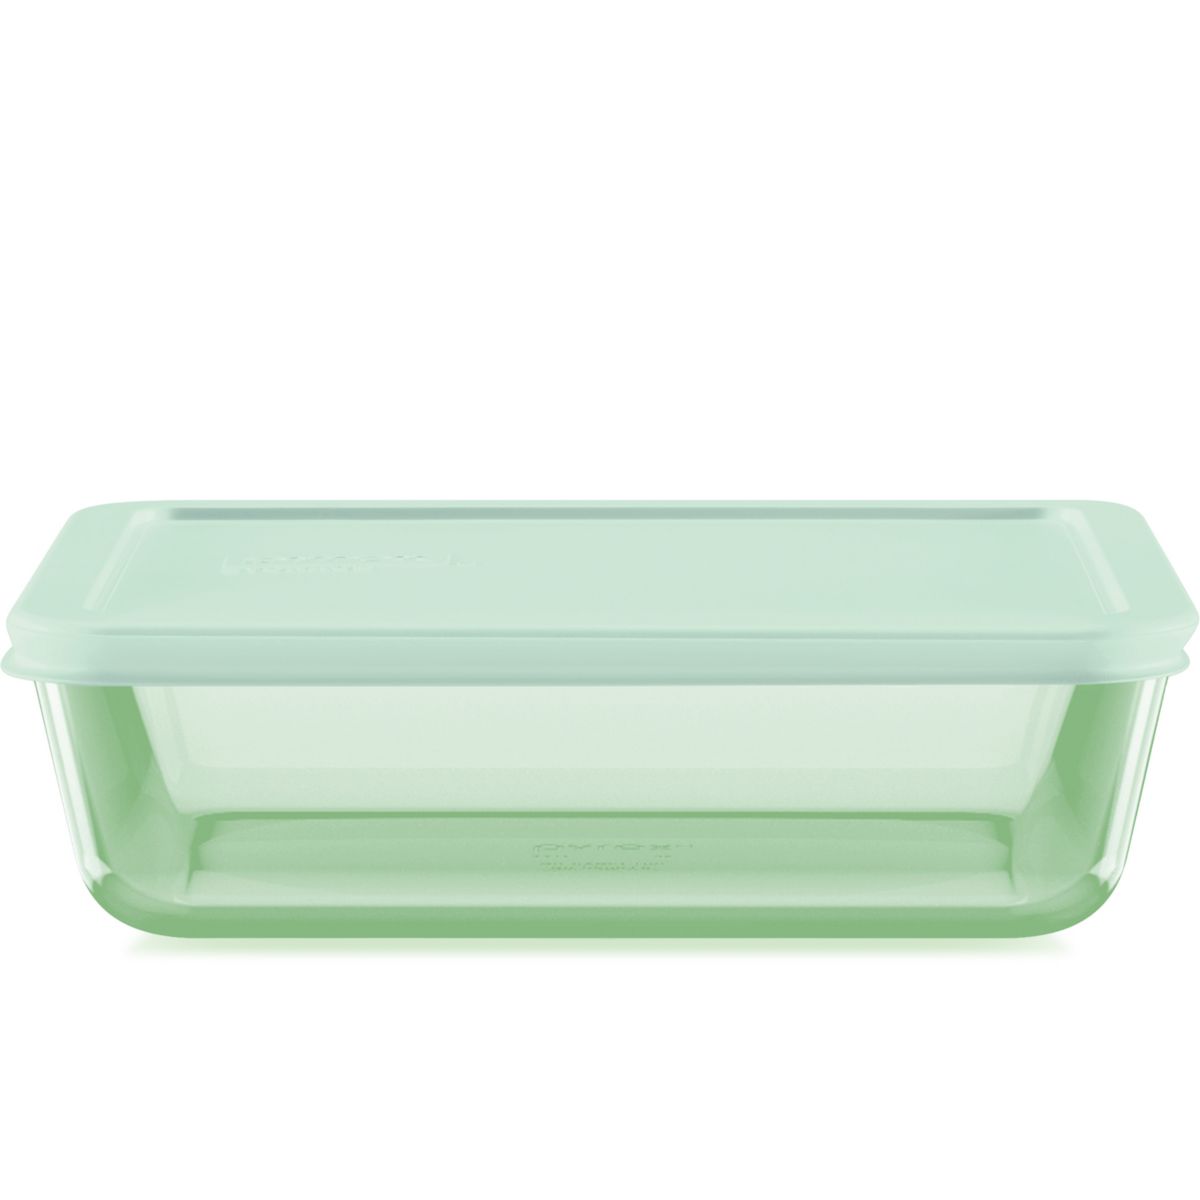 Pyrex Simply Store Green Tinted 6-cup Rectangle Food Storage with Plastic Lid Pyrex